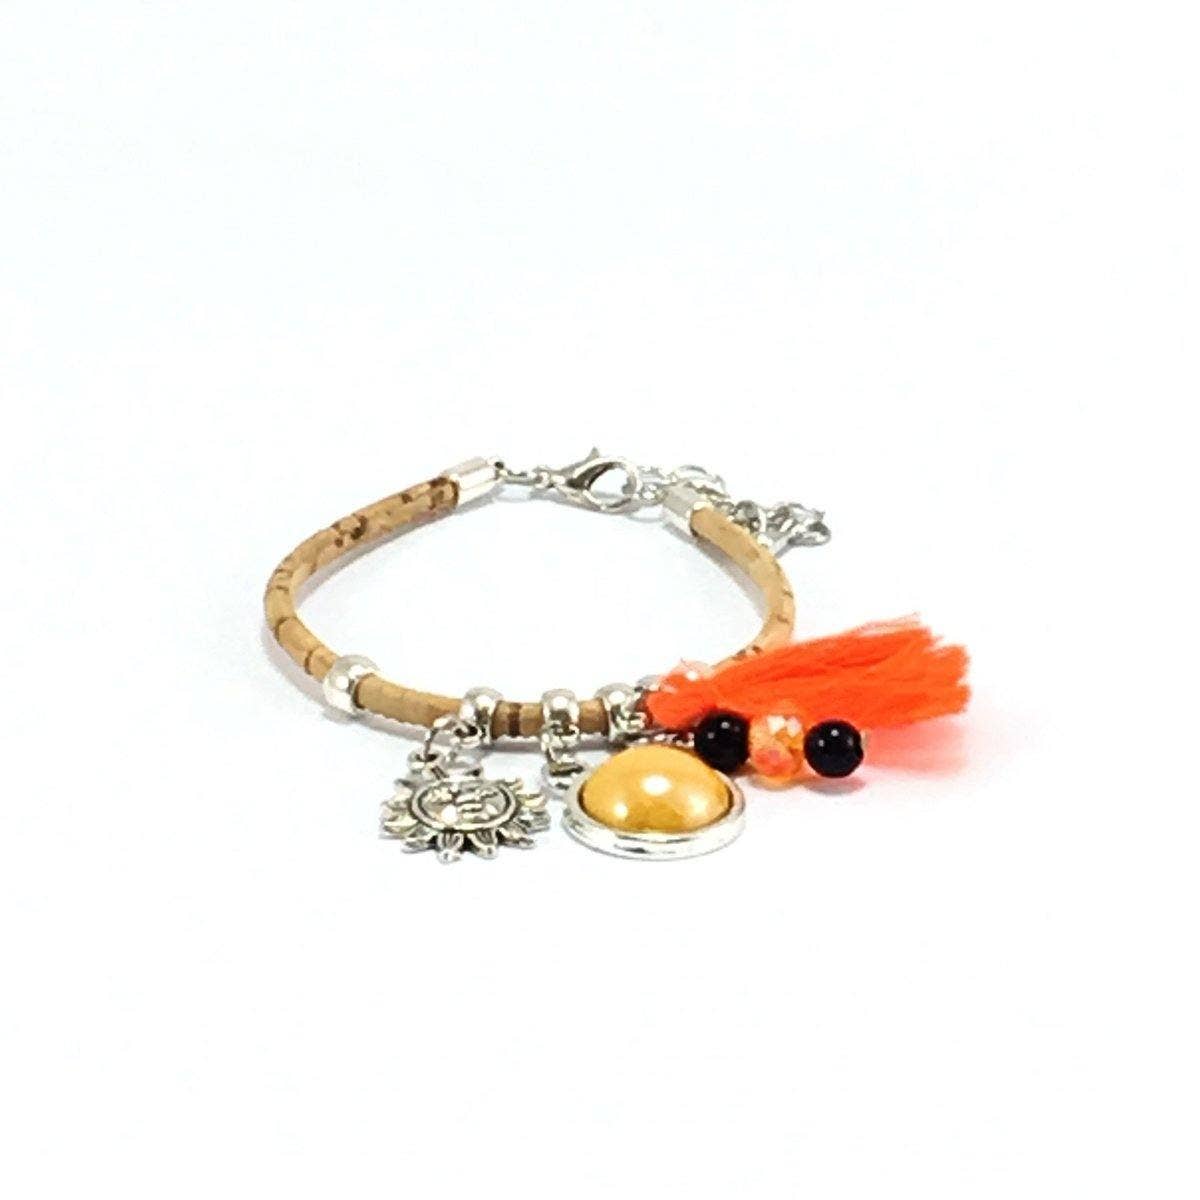 Cork Bracelet with Orange Tassels and Little Charms